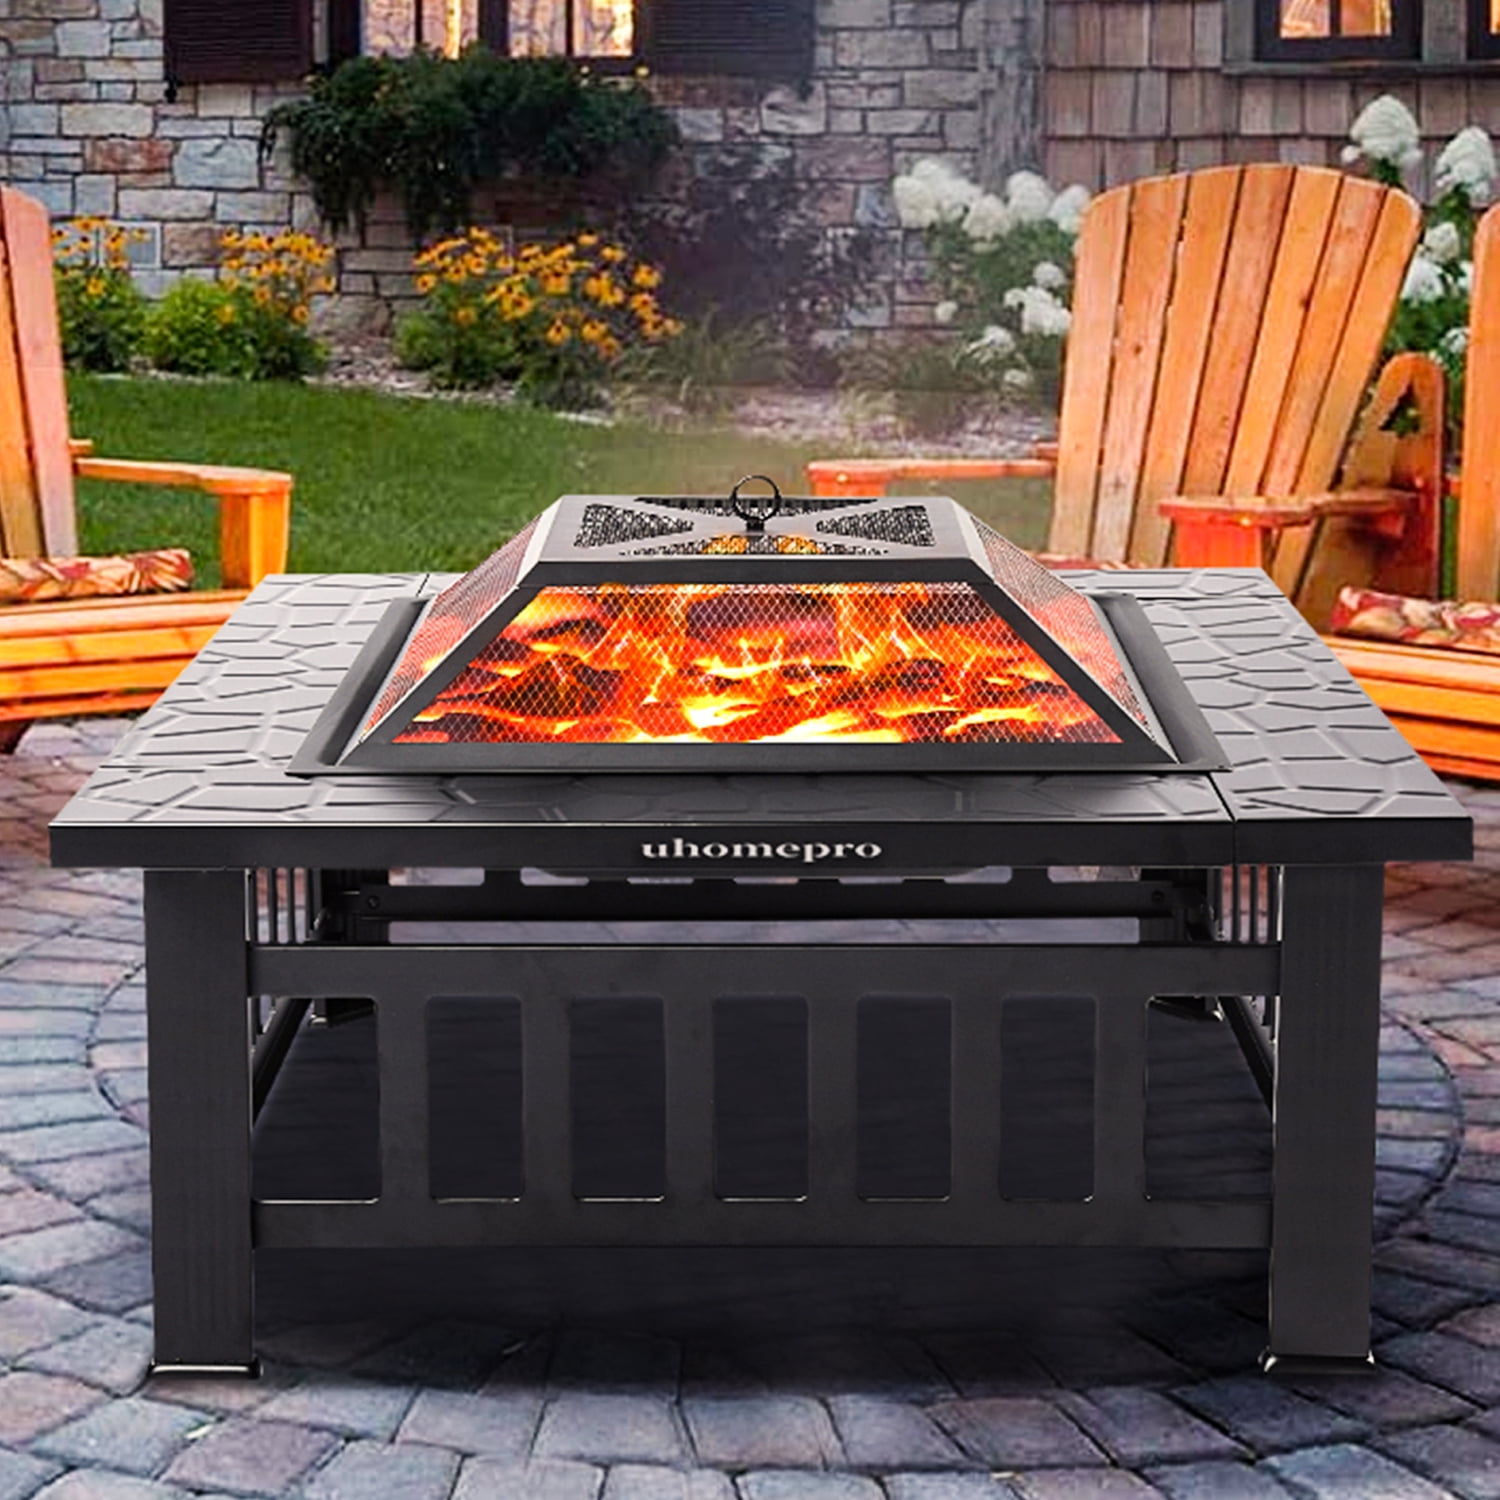 HomGarden 32 Fire Pit Outdoor Patio Square Metal Heater Deck Firepit Backyard Garden Home Stove Burning Fireplace w/Spark Screen,Poker,Cover,Grill 